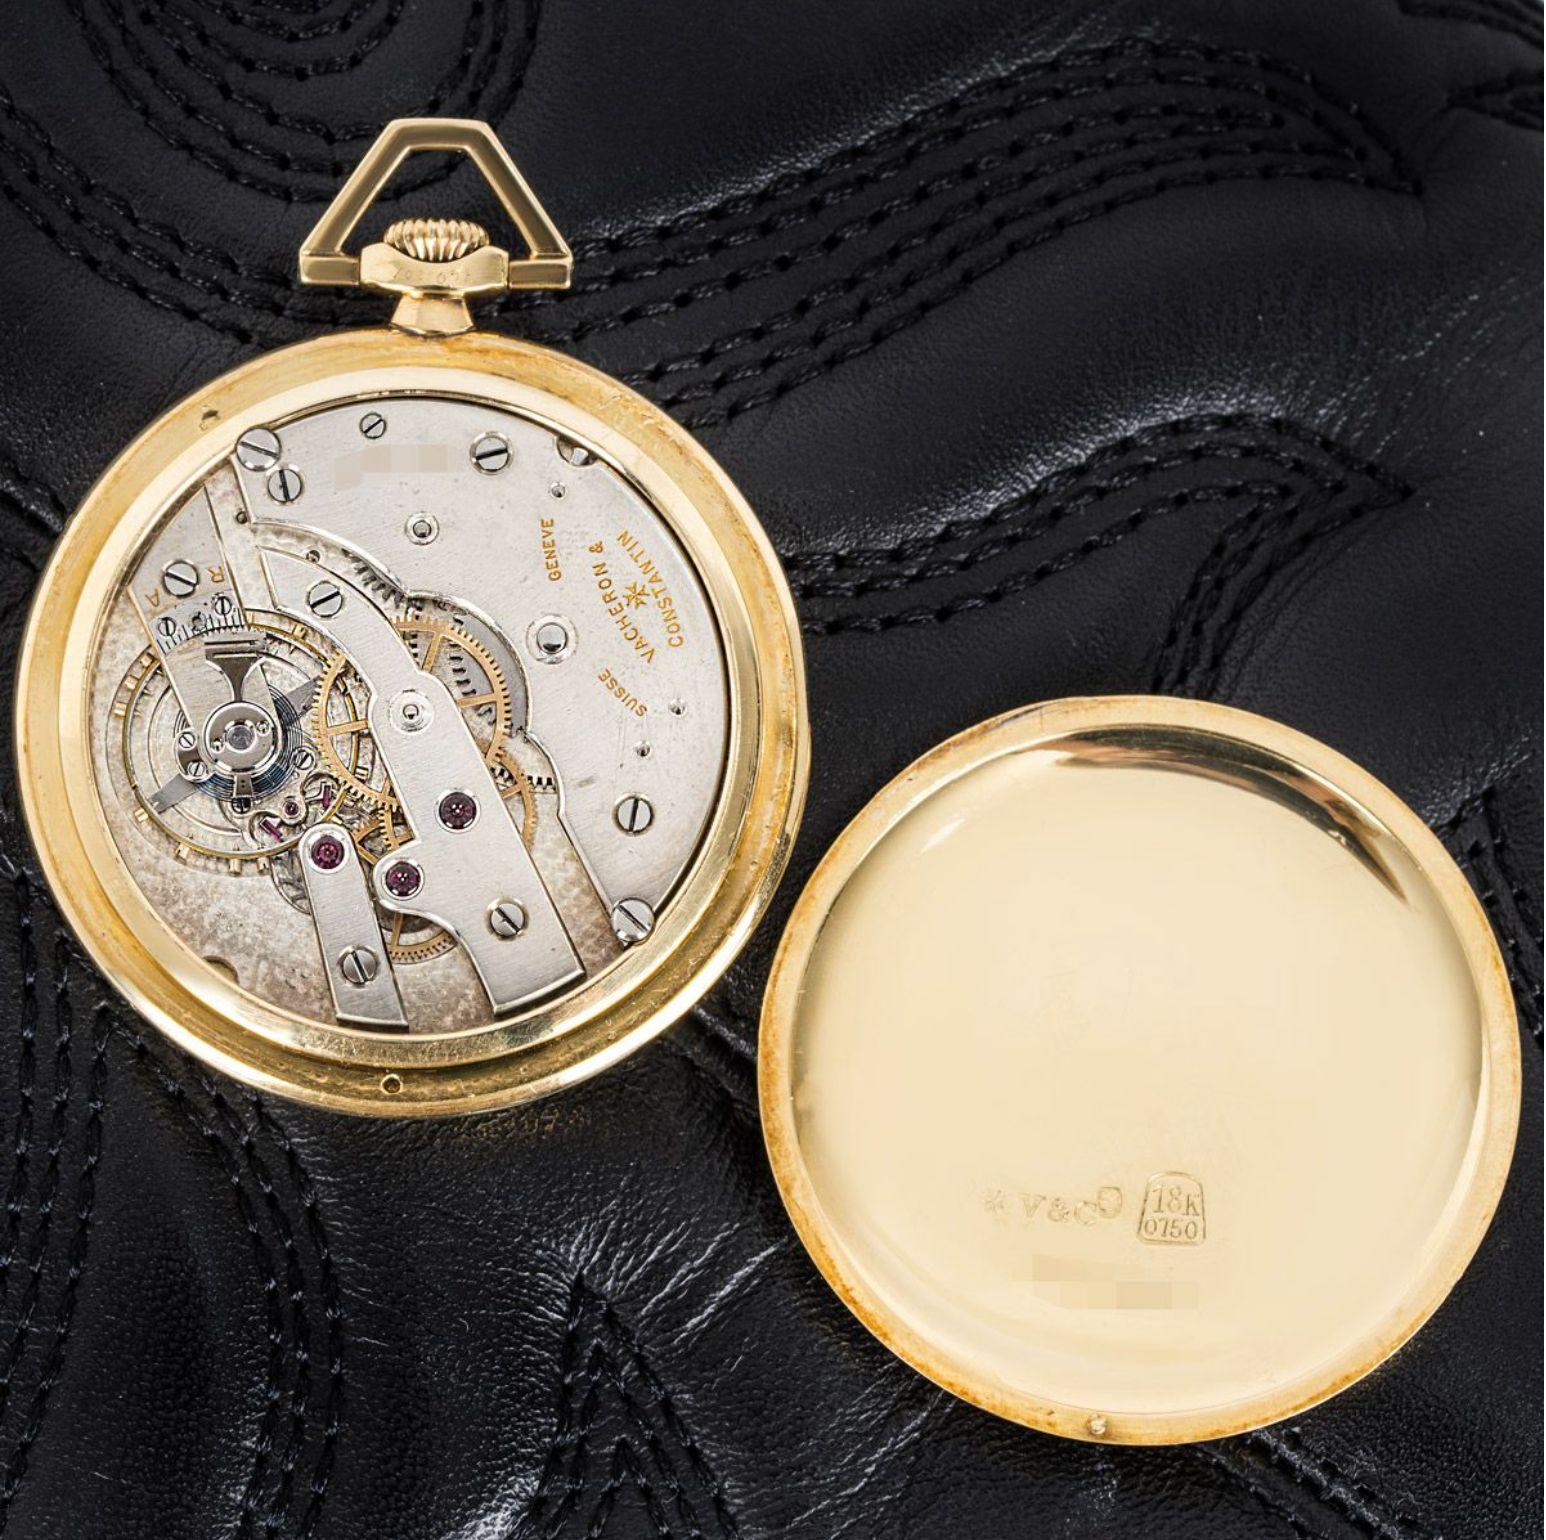 Vacheron Constantin Gold Keyless Lever Open Face Pocket Watch C1920s In Excellent Condition For Sale In London, GB